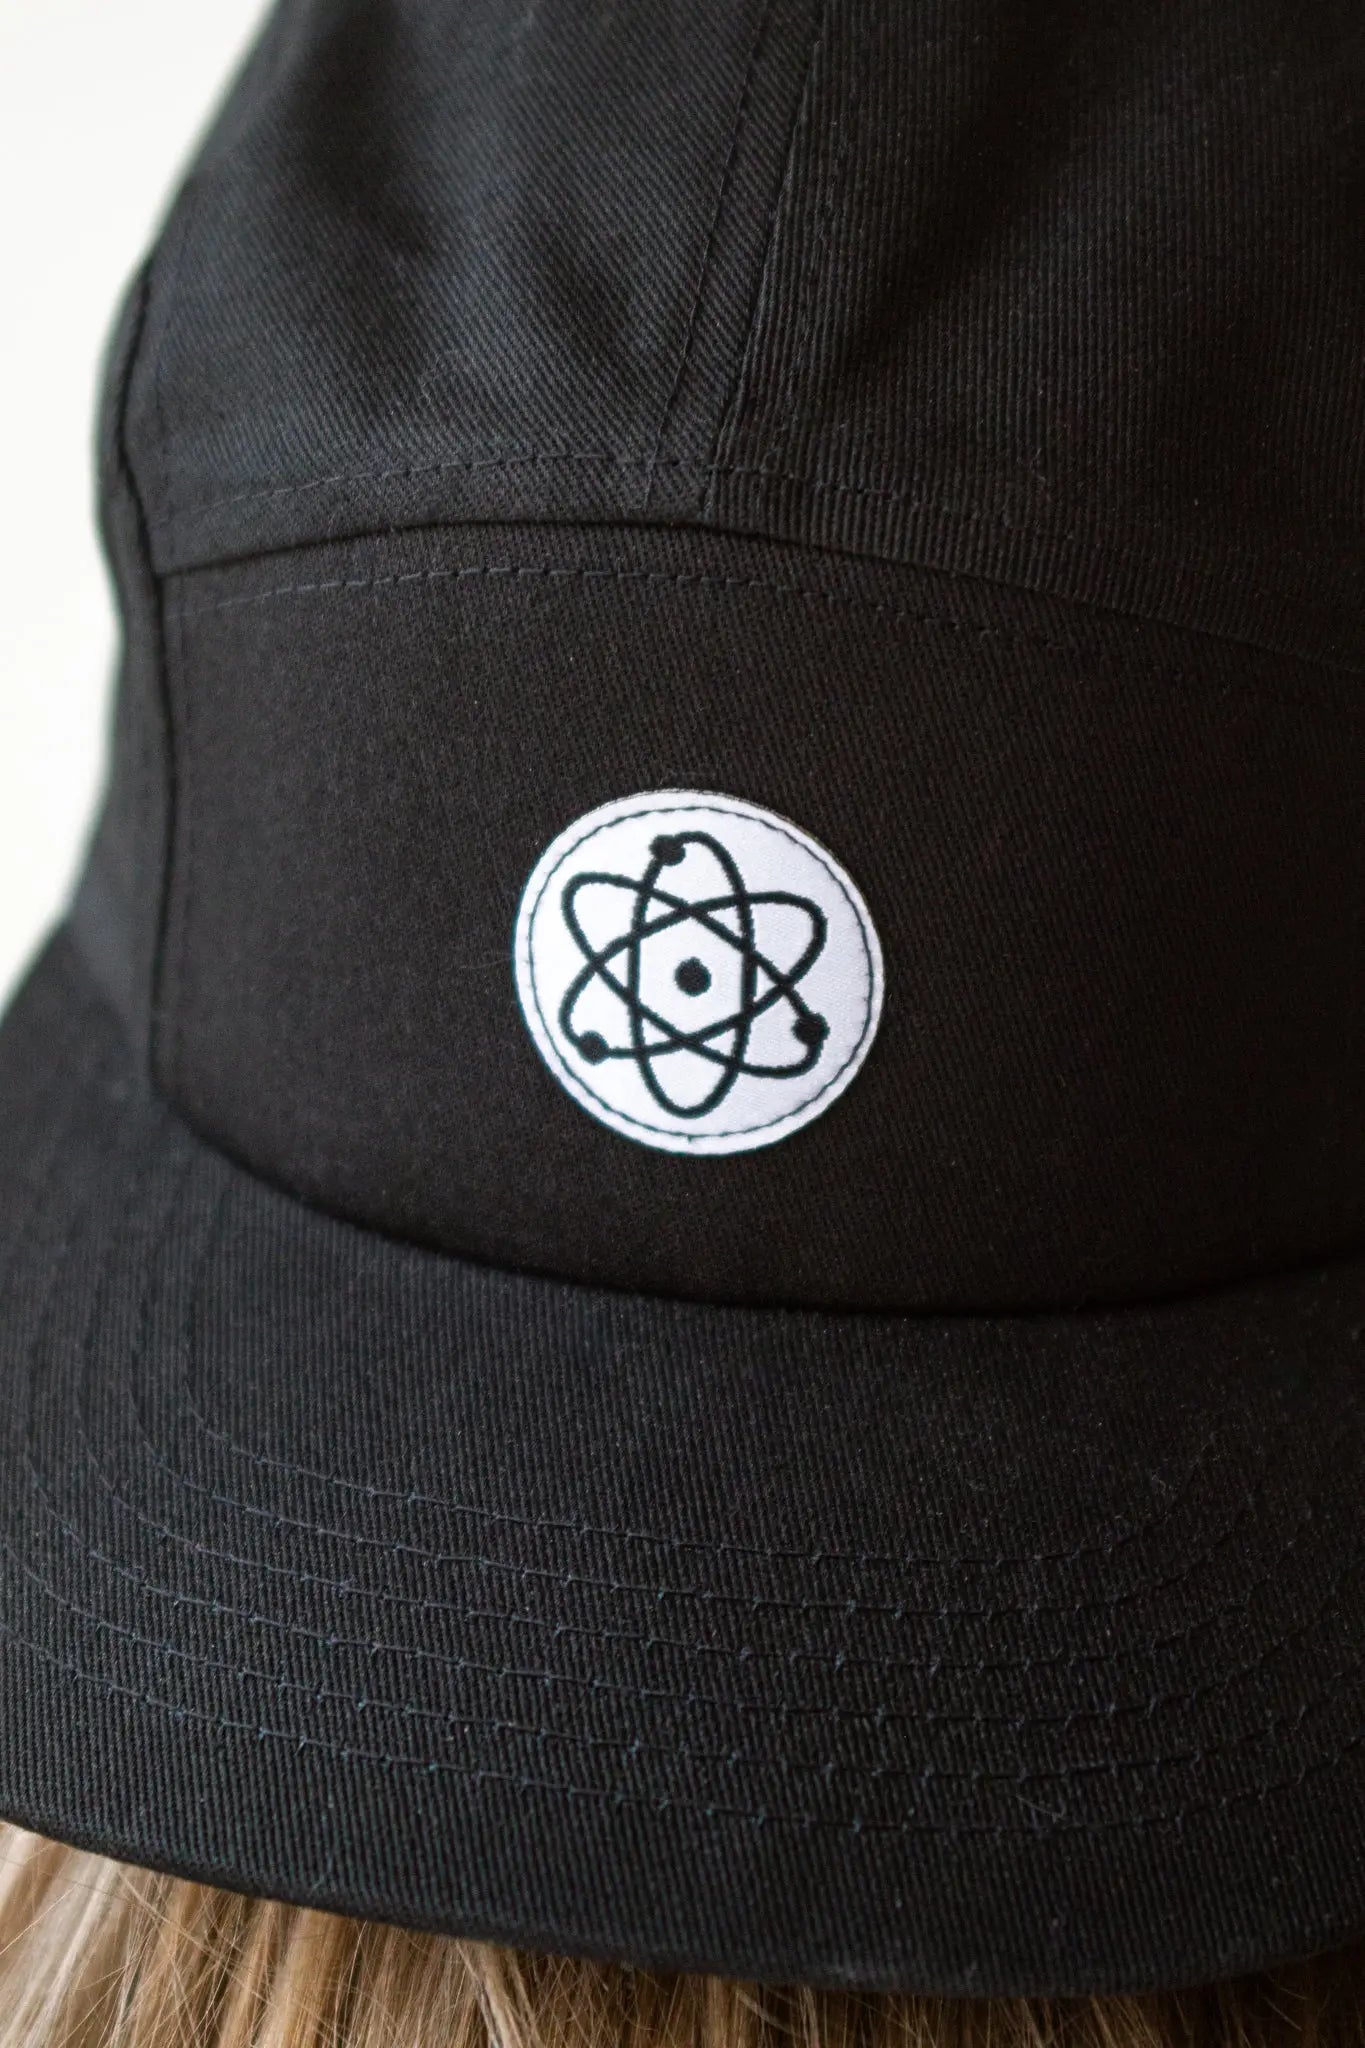 Stemcell Atomic Cap - Stemcell Science Shop